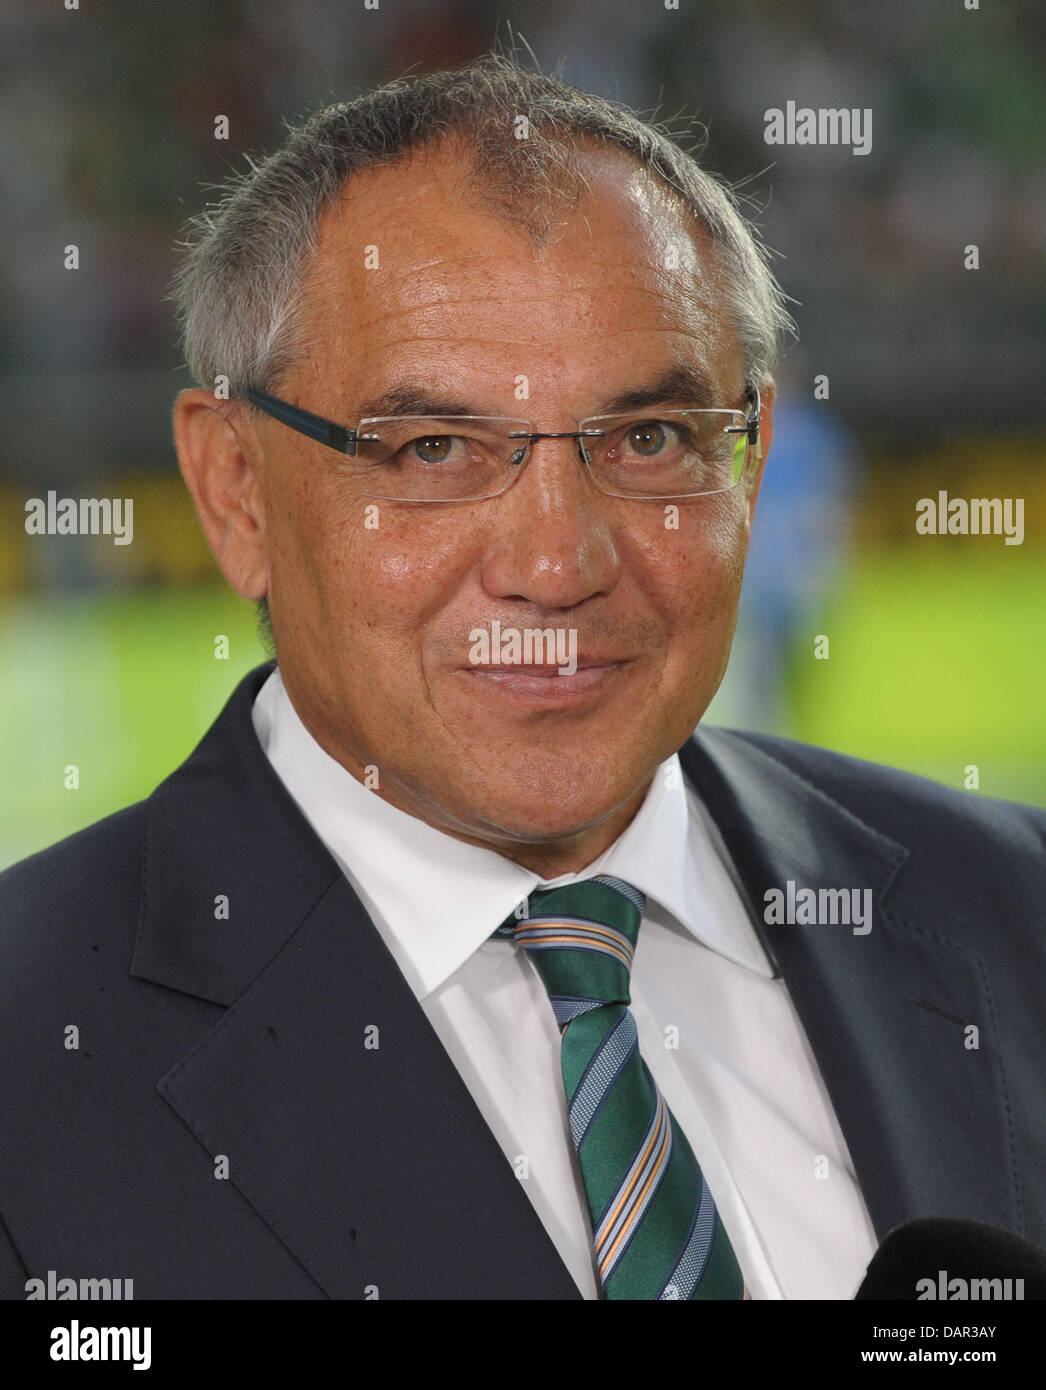 Wolfsburg's head coach Felix Magath is seen during an interview prior to the German Bundesliga match between VfL Wolfsburg and FC Schalke 04 at Volkswagen-Arena in Wolfsburg, Germany, 11 September 2011. Photo: PETER STEFFEN   (ATTENTION: EMBARGO CONDITIONS! The DFL permits the further utilisation of the pictures in IPTV, mobile services and other new technologies only no earlier th Stock Photo